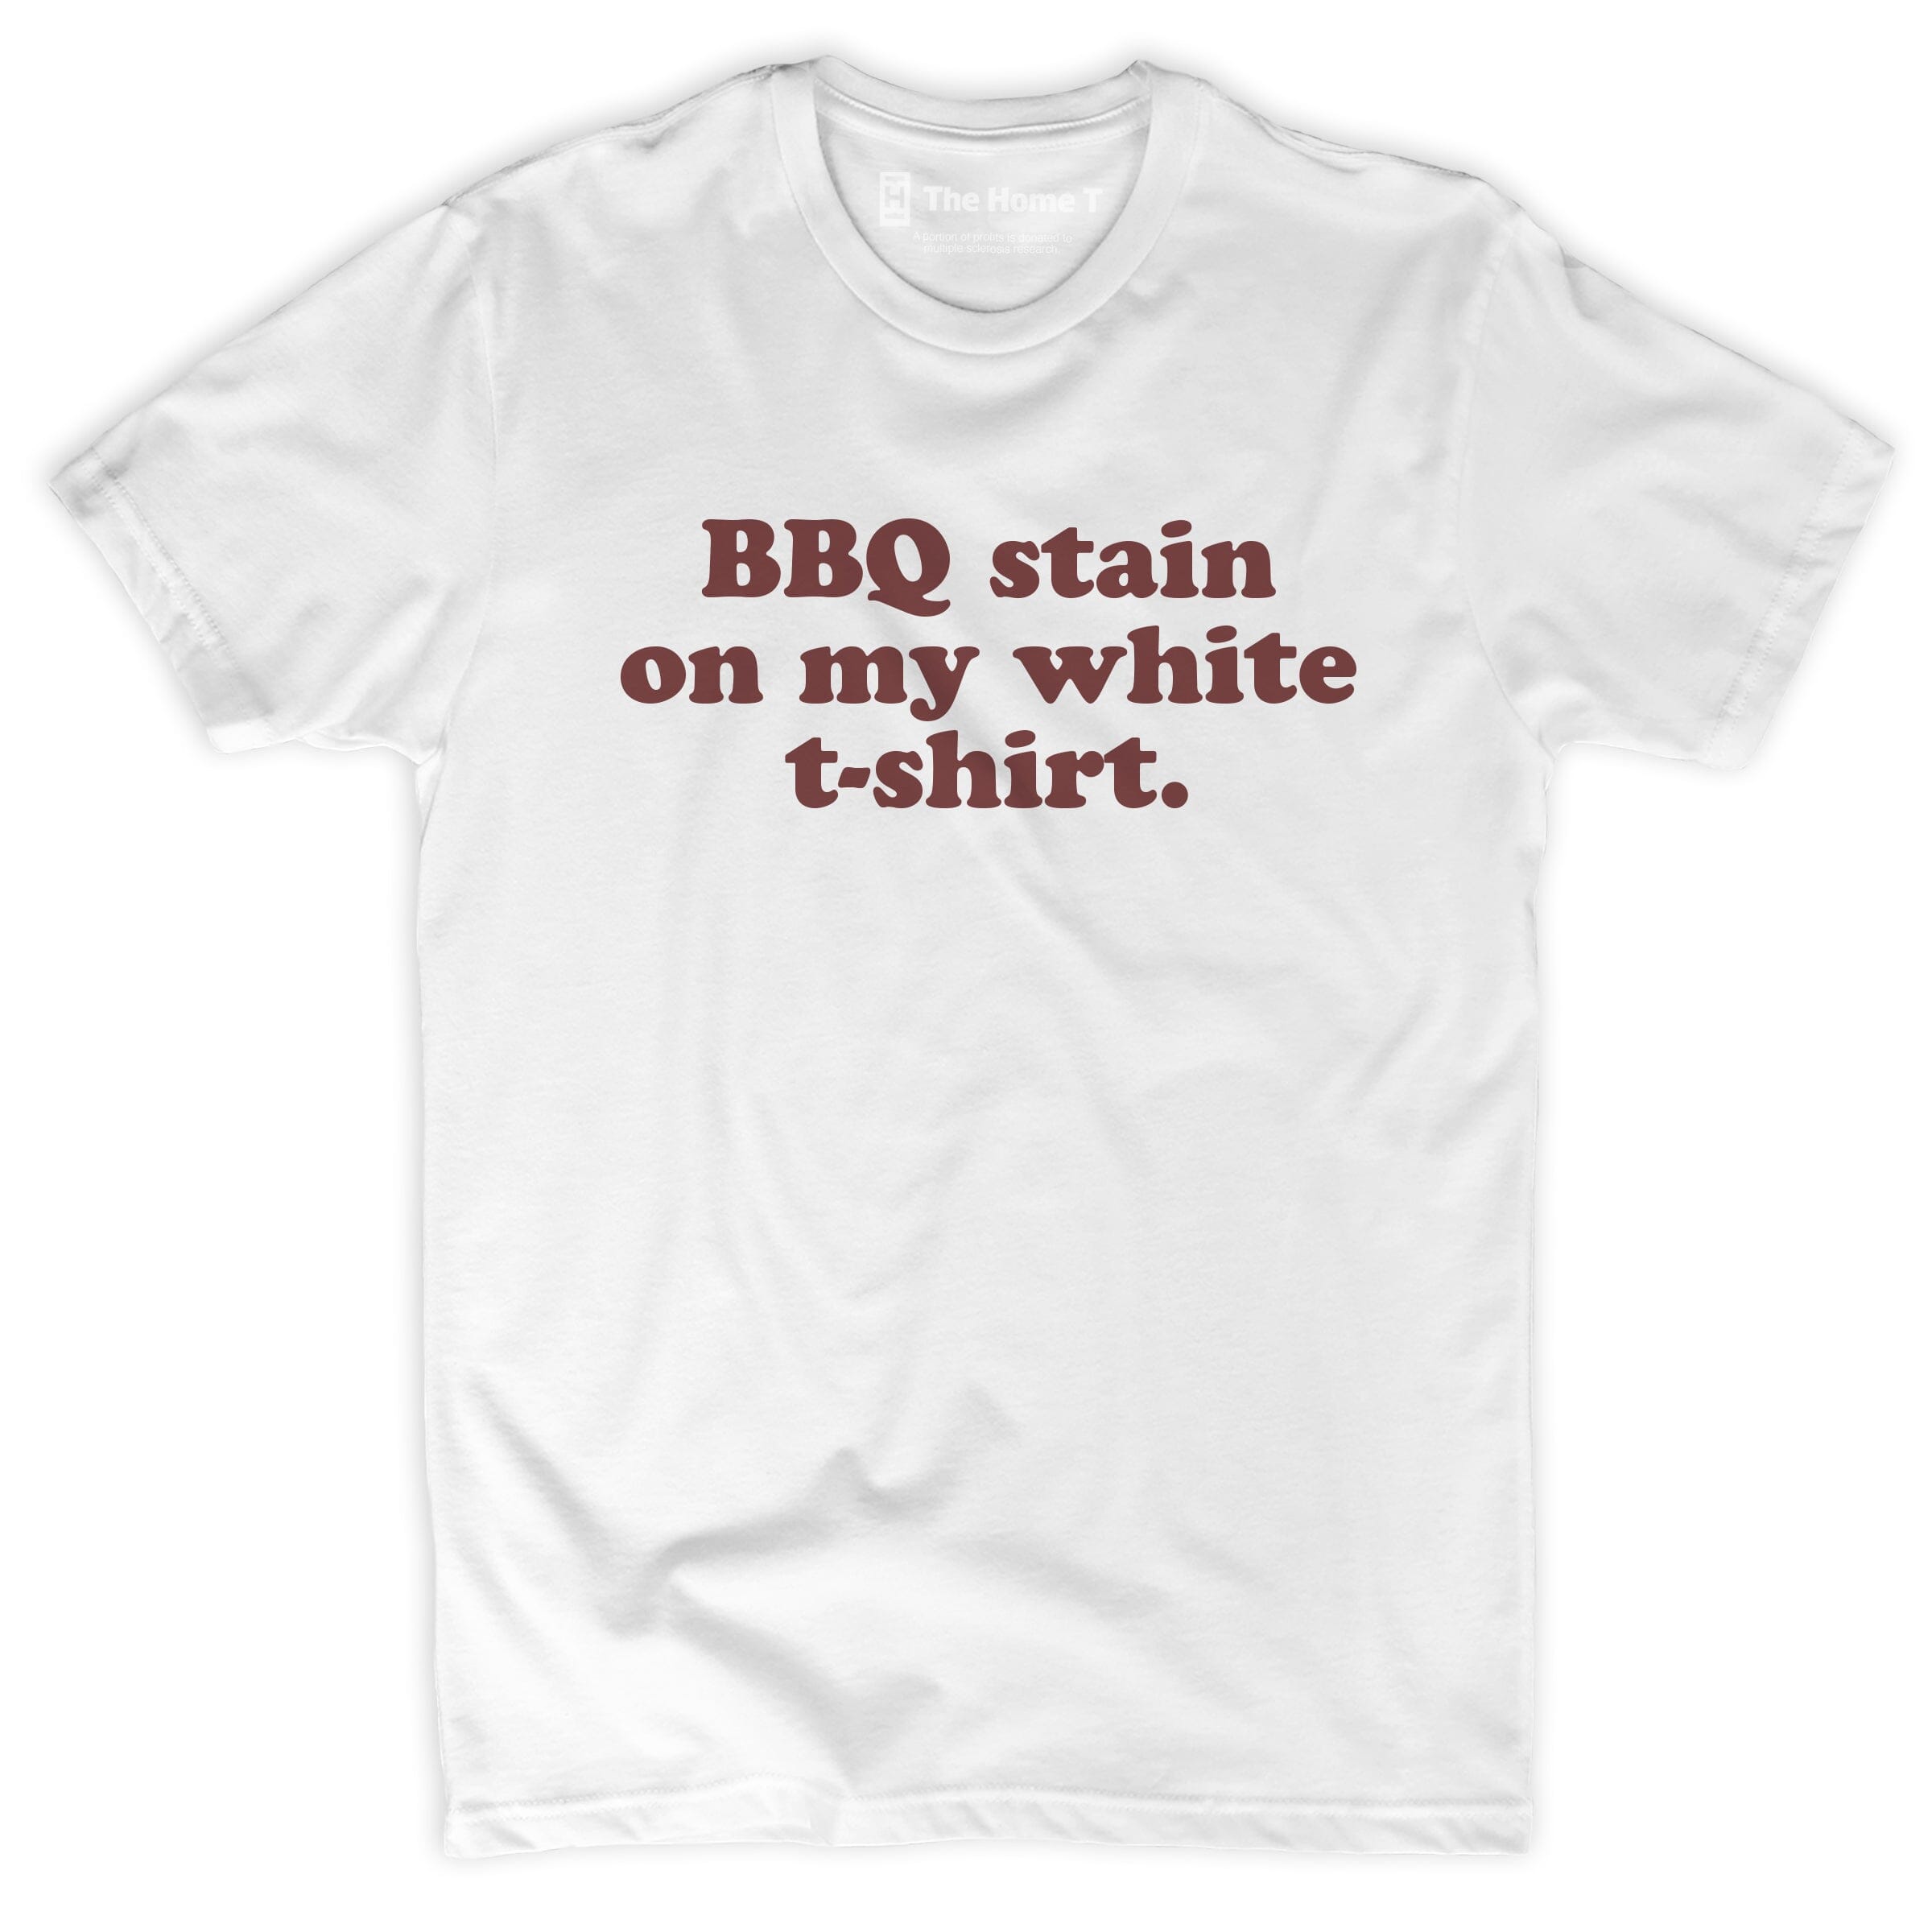 BBQ Stain on My White T-shirt